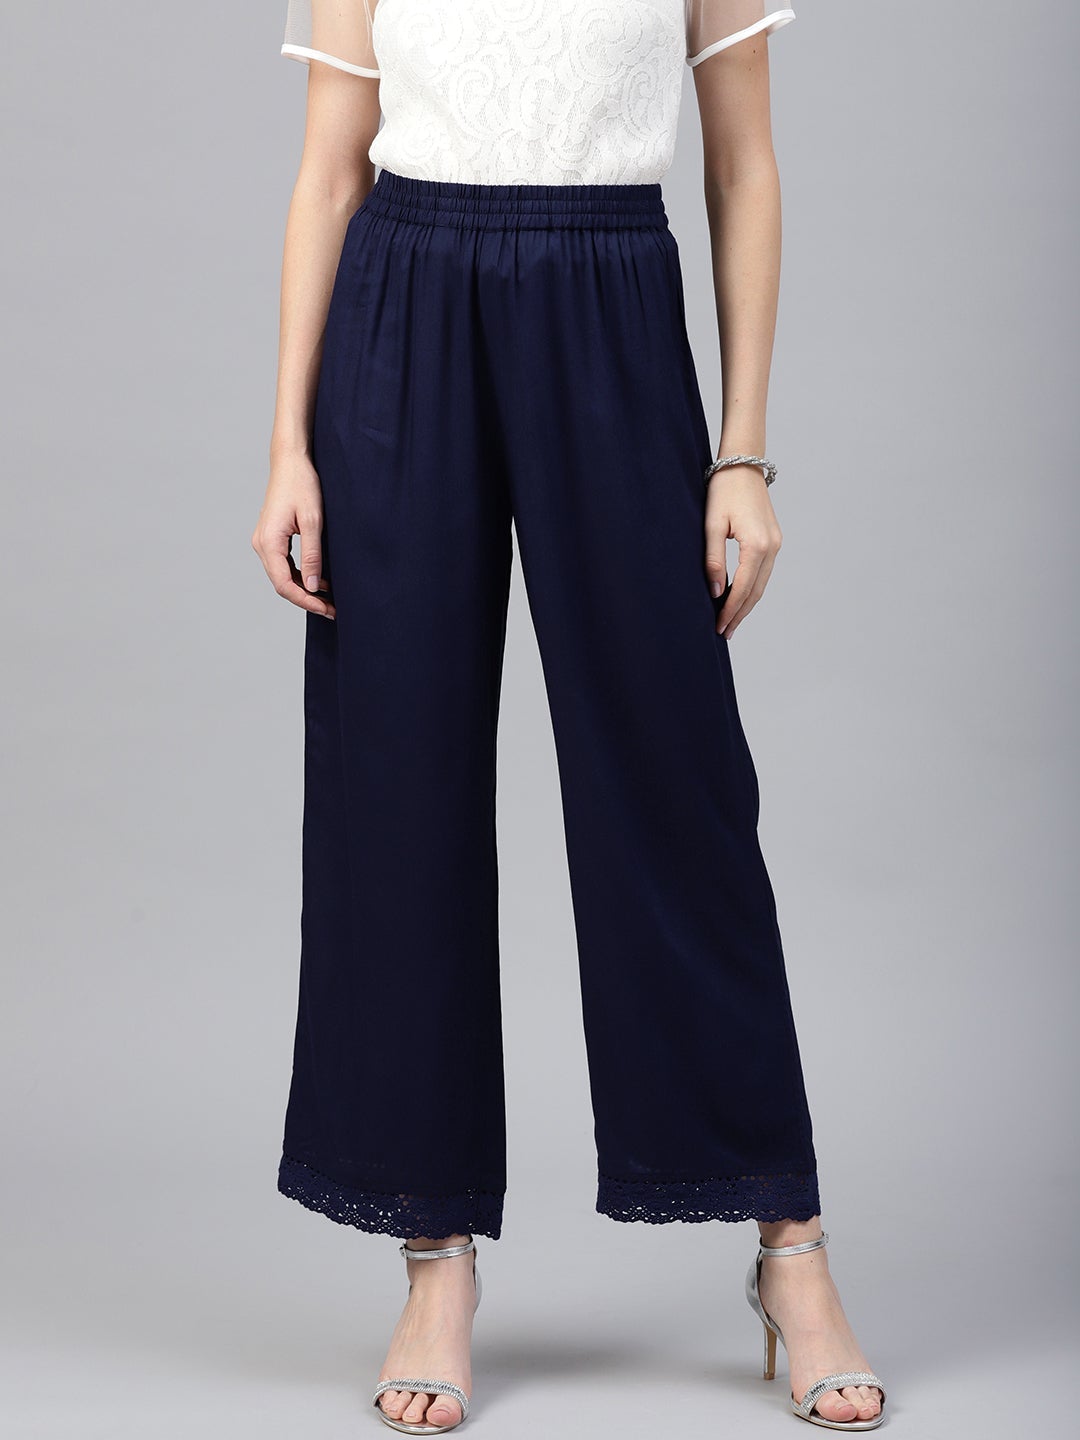 Juniper Navy Blue Solid Rayon Wide Leg Women Palazzo With One Pocket